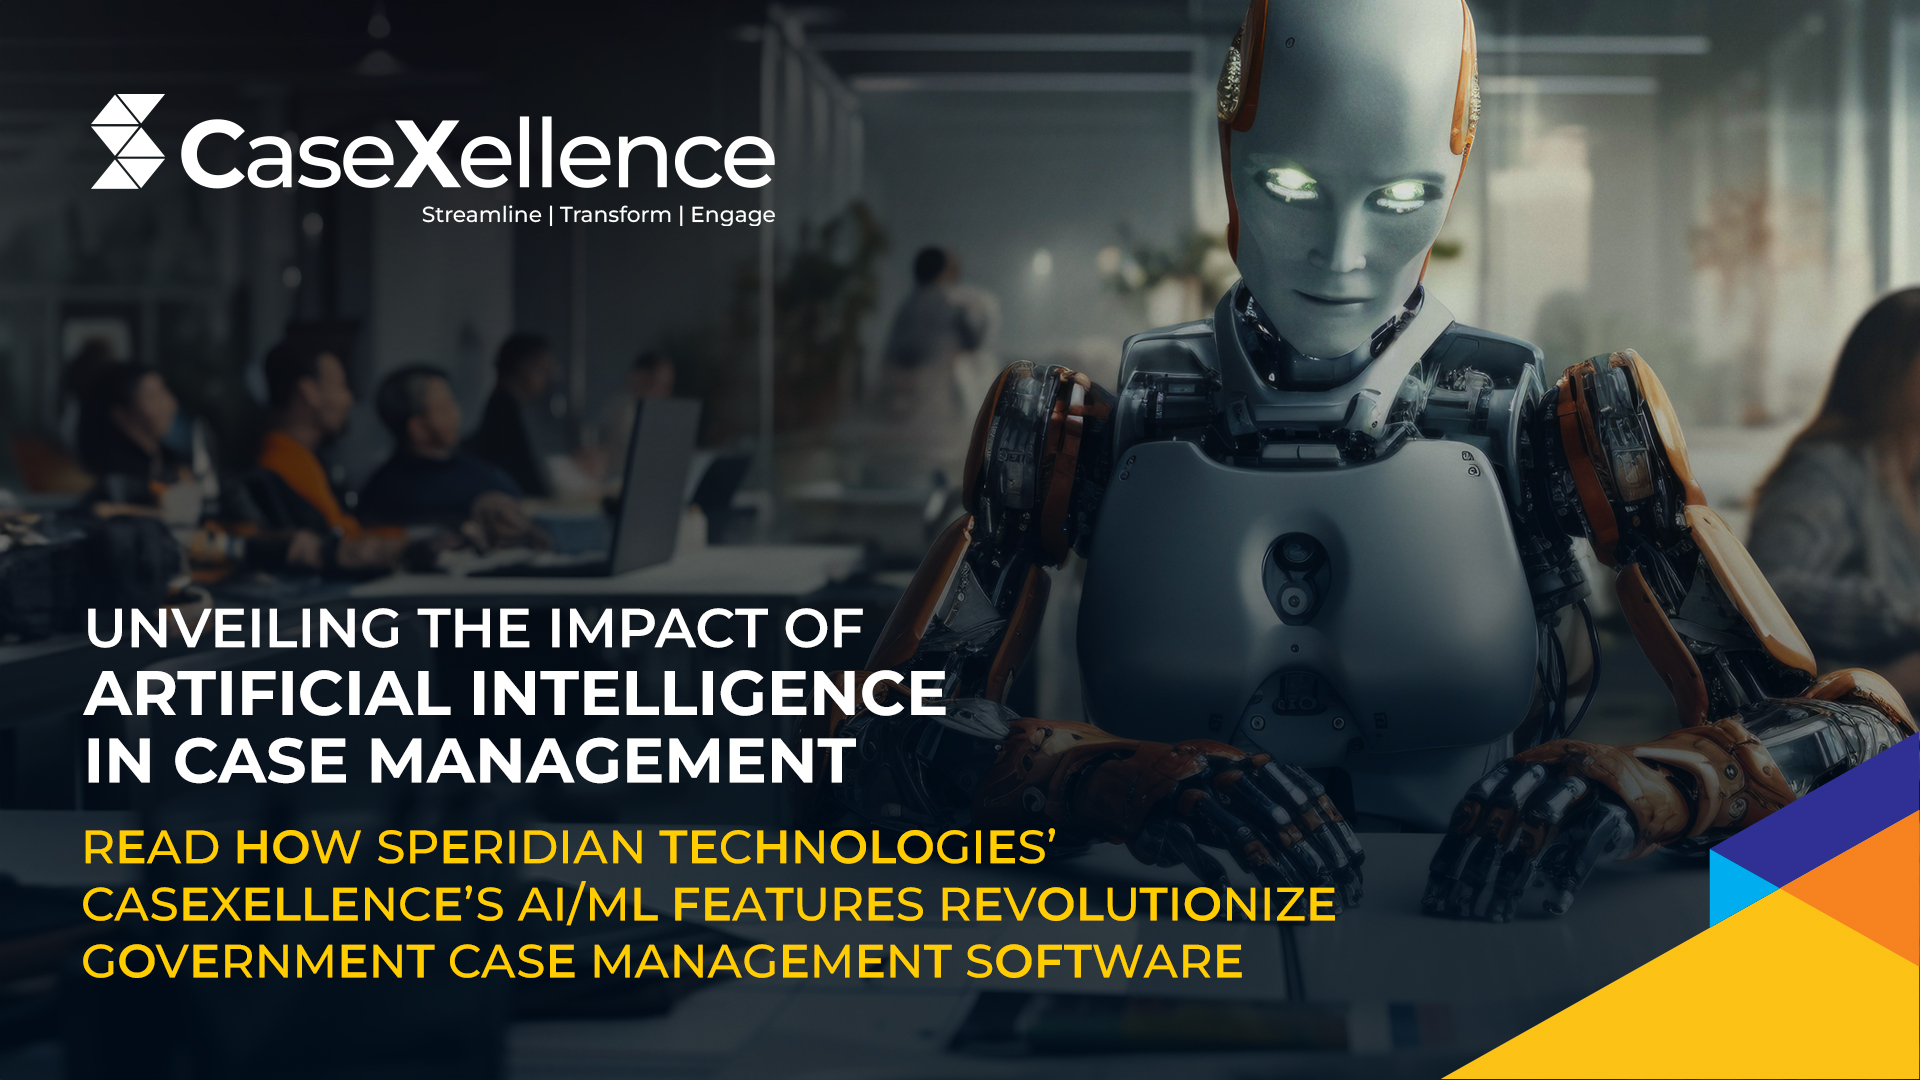 Artificial Intelligence in case management software